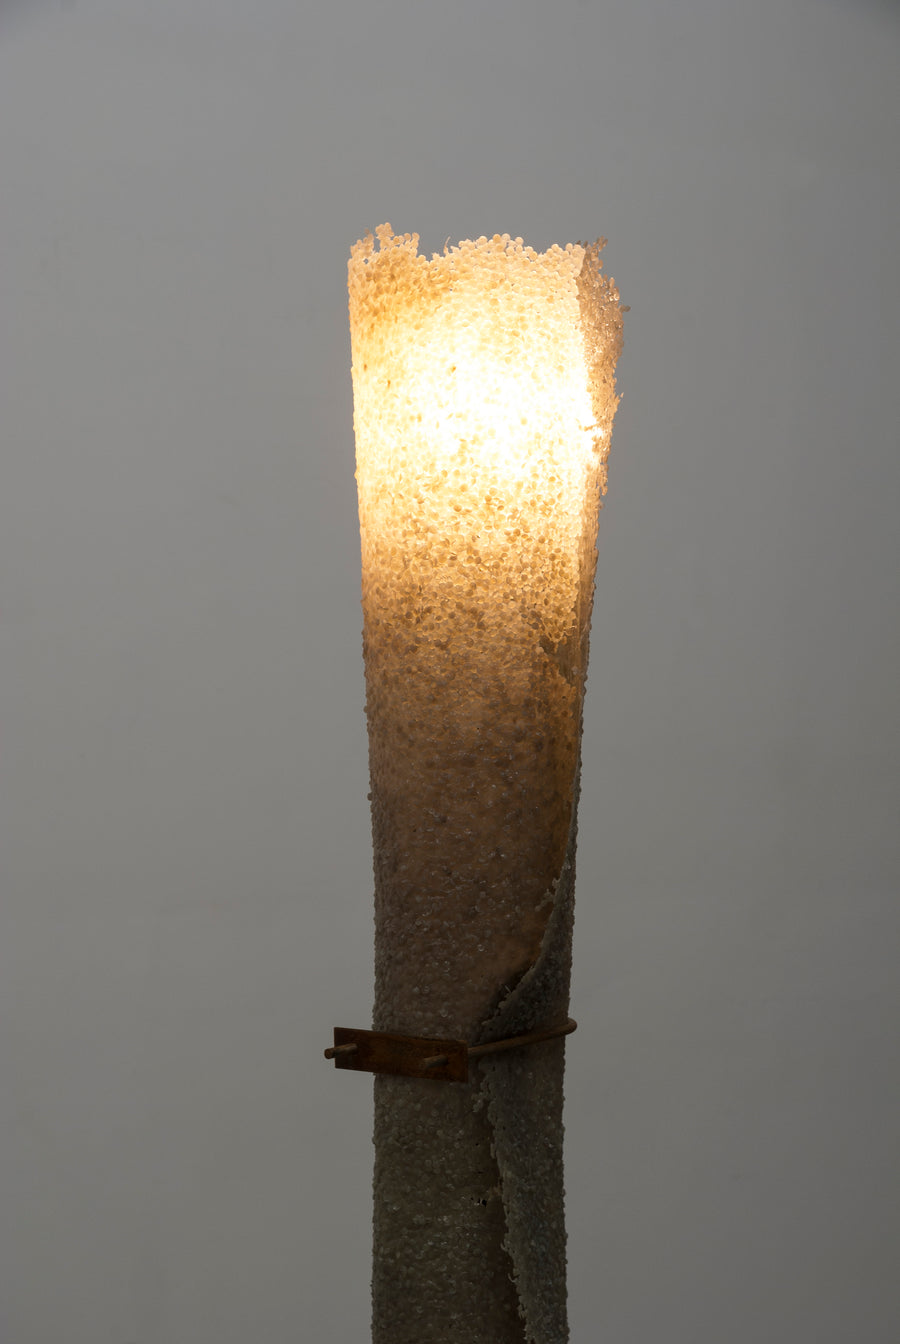 Artistic light sculpture and lamp hand sculpted by Bailey Fontaine. Represented by Tuleste Factory in New York City. 